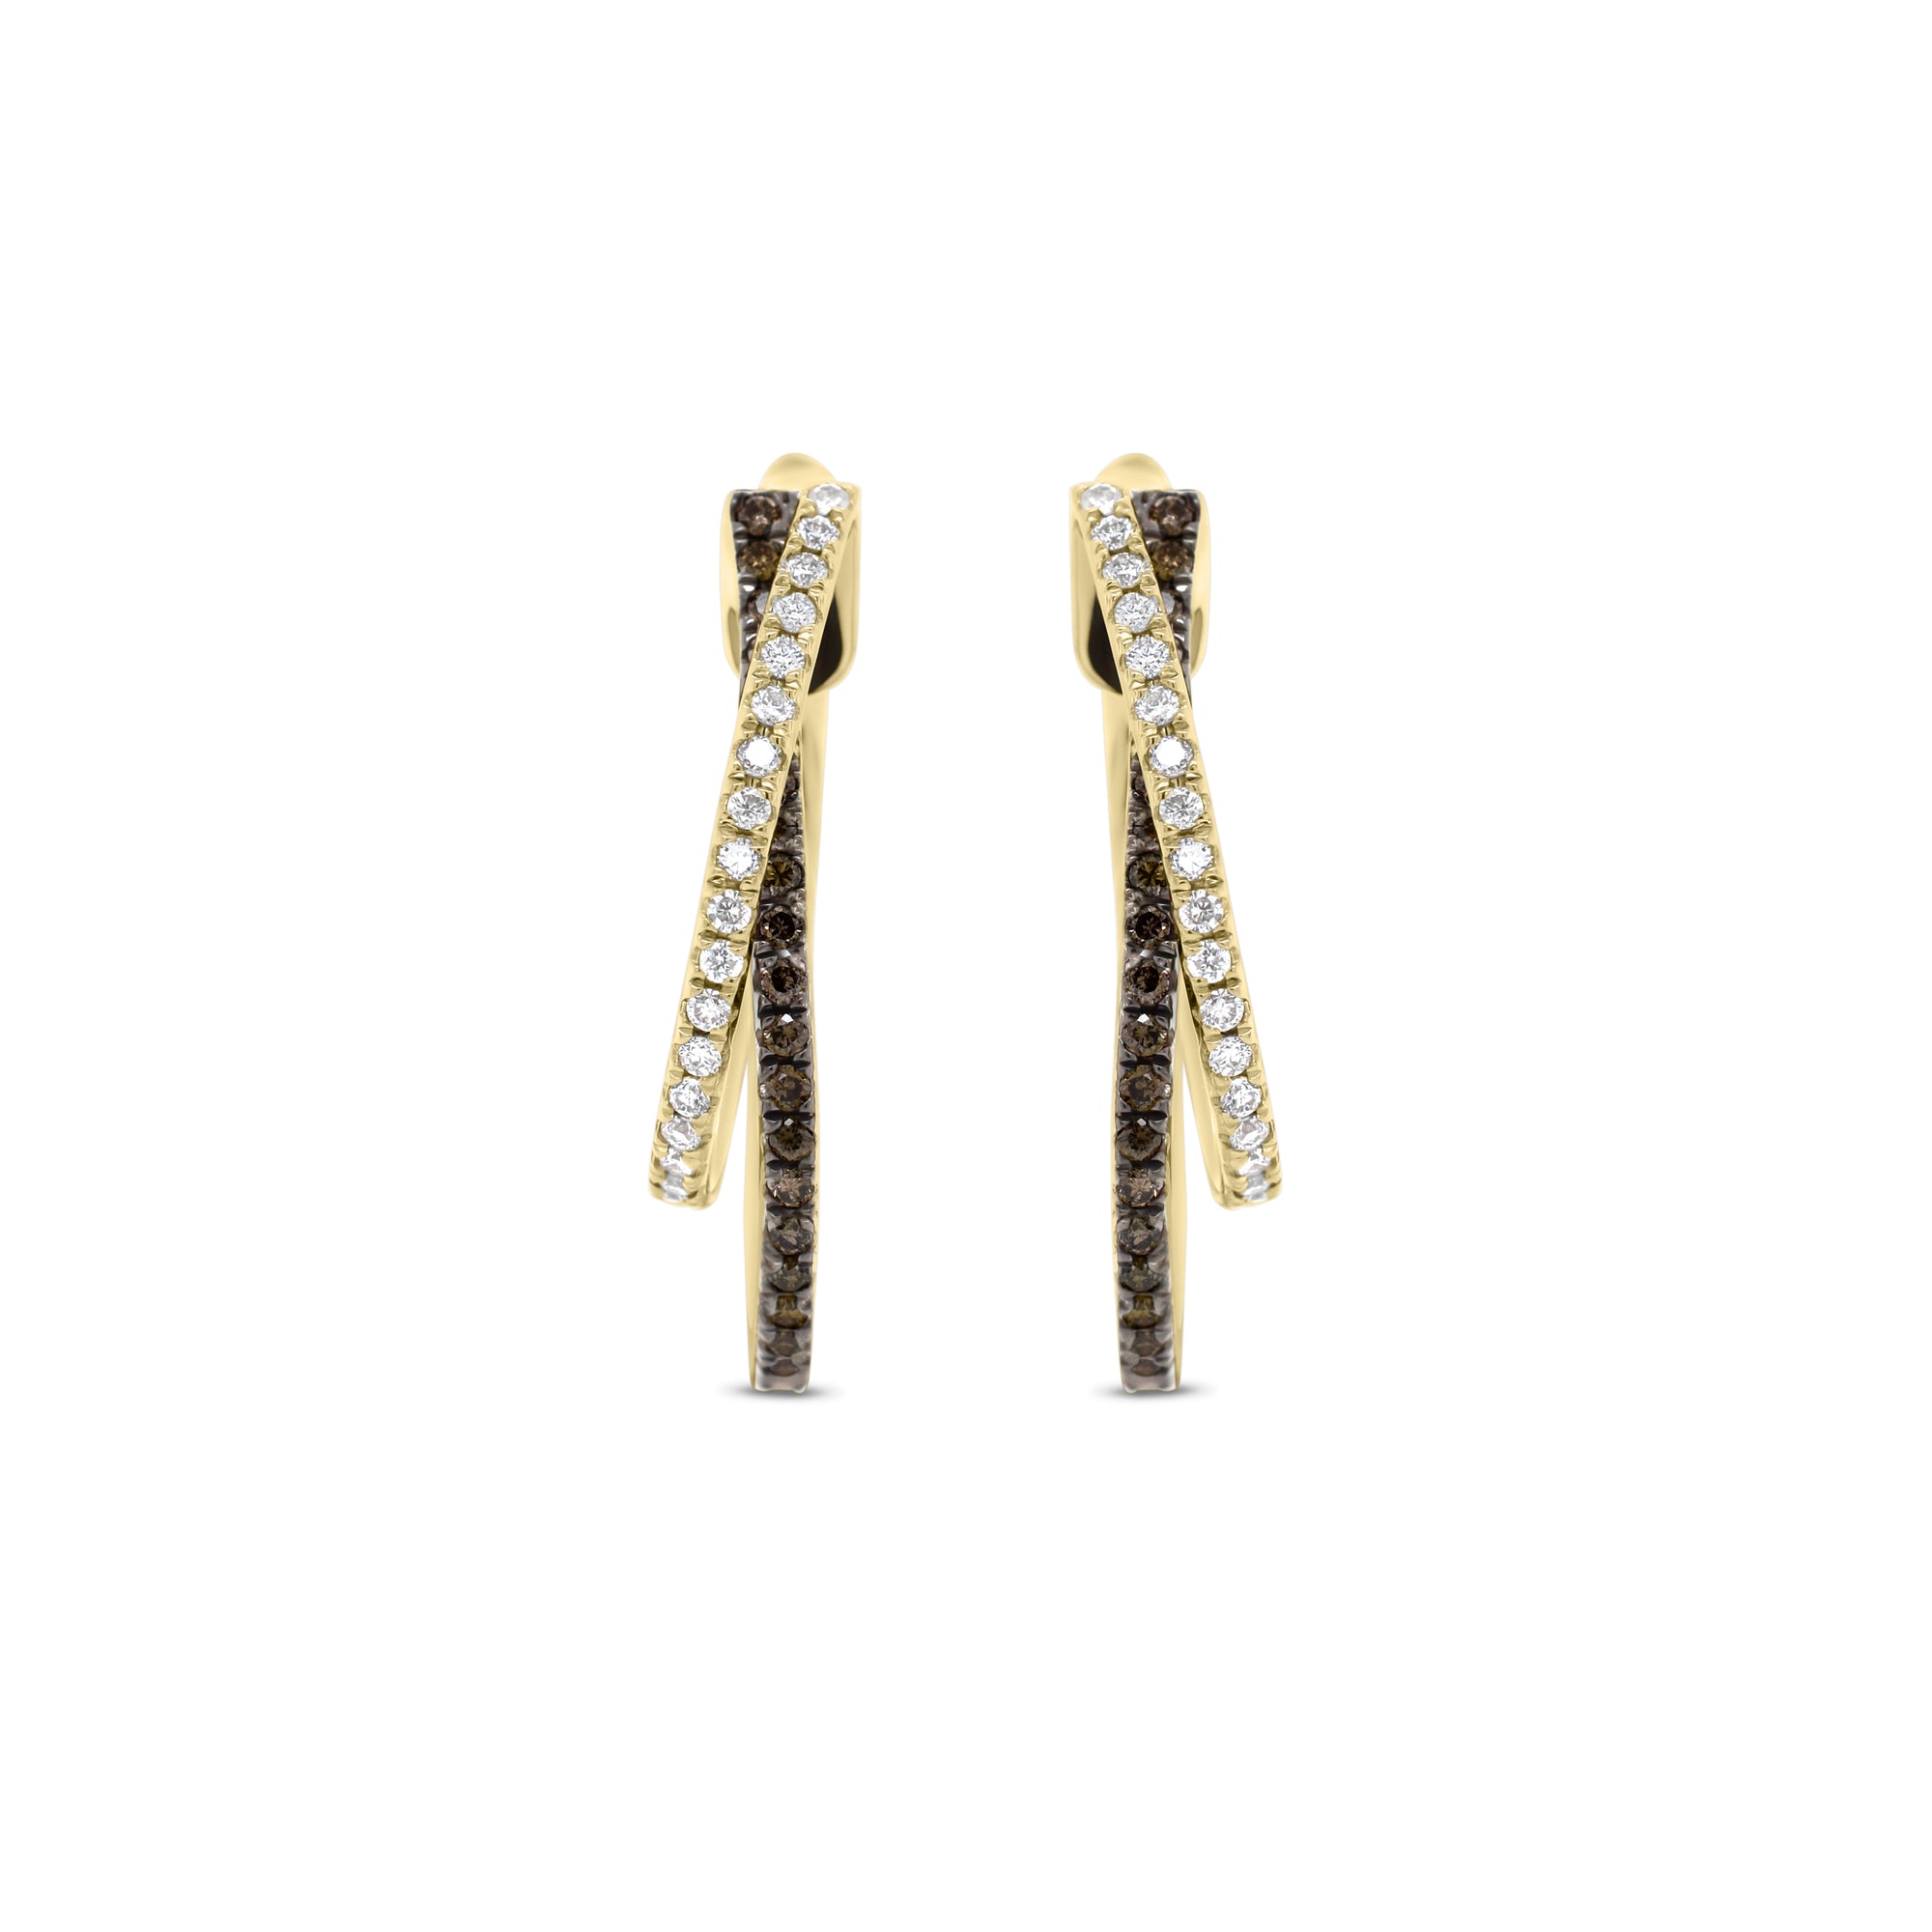 Diamond two-tone crossover hoop earrings - 18K gold weighing 5.38 grams  - 38 round diamonds totaling 0.27 carats  - 44 black diamonds totaling 0.33 carats